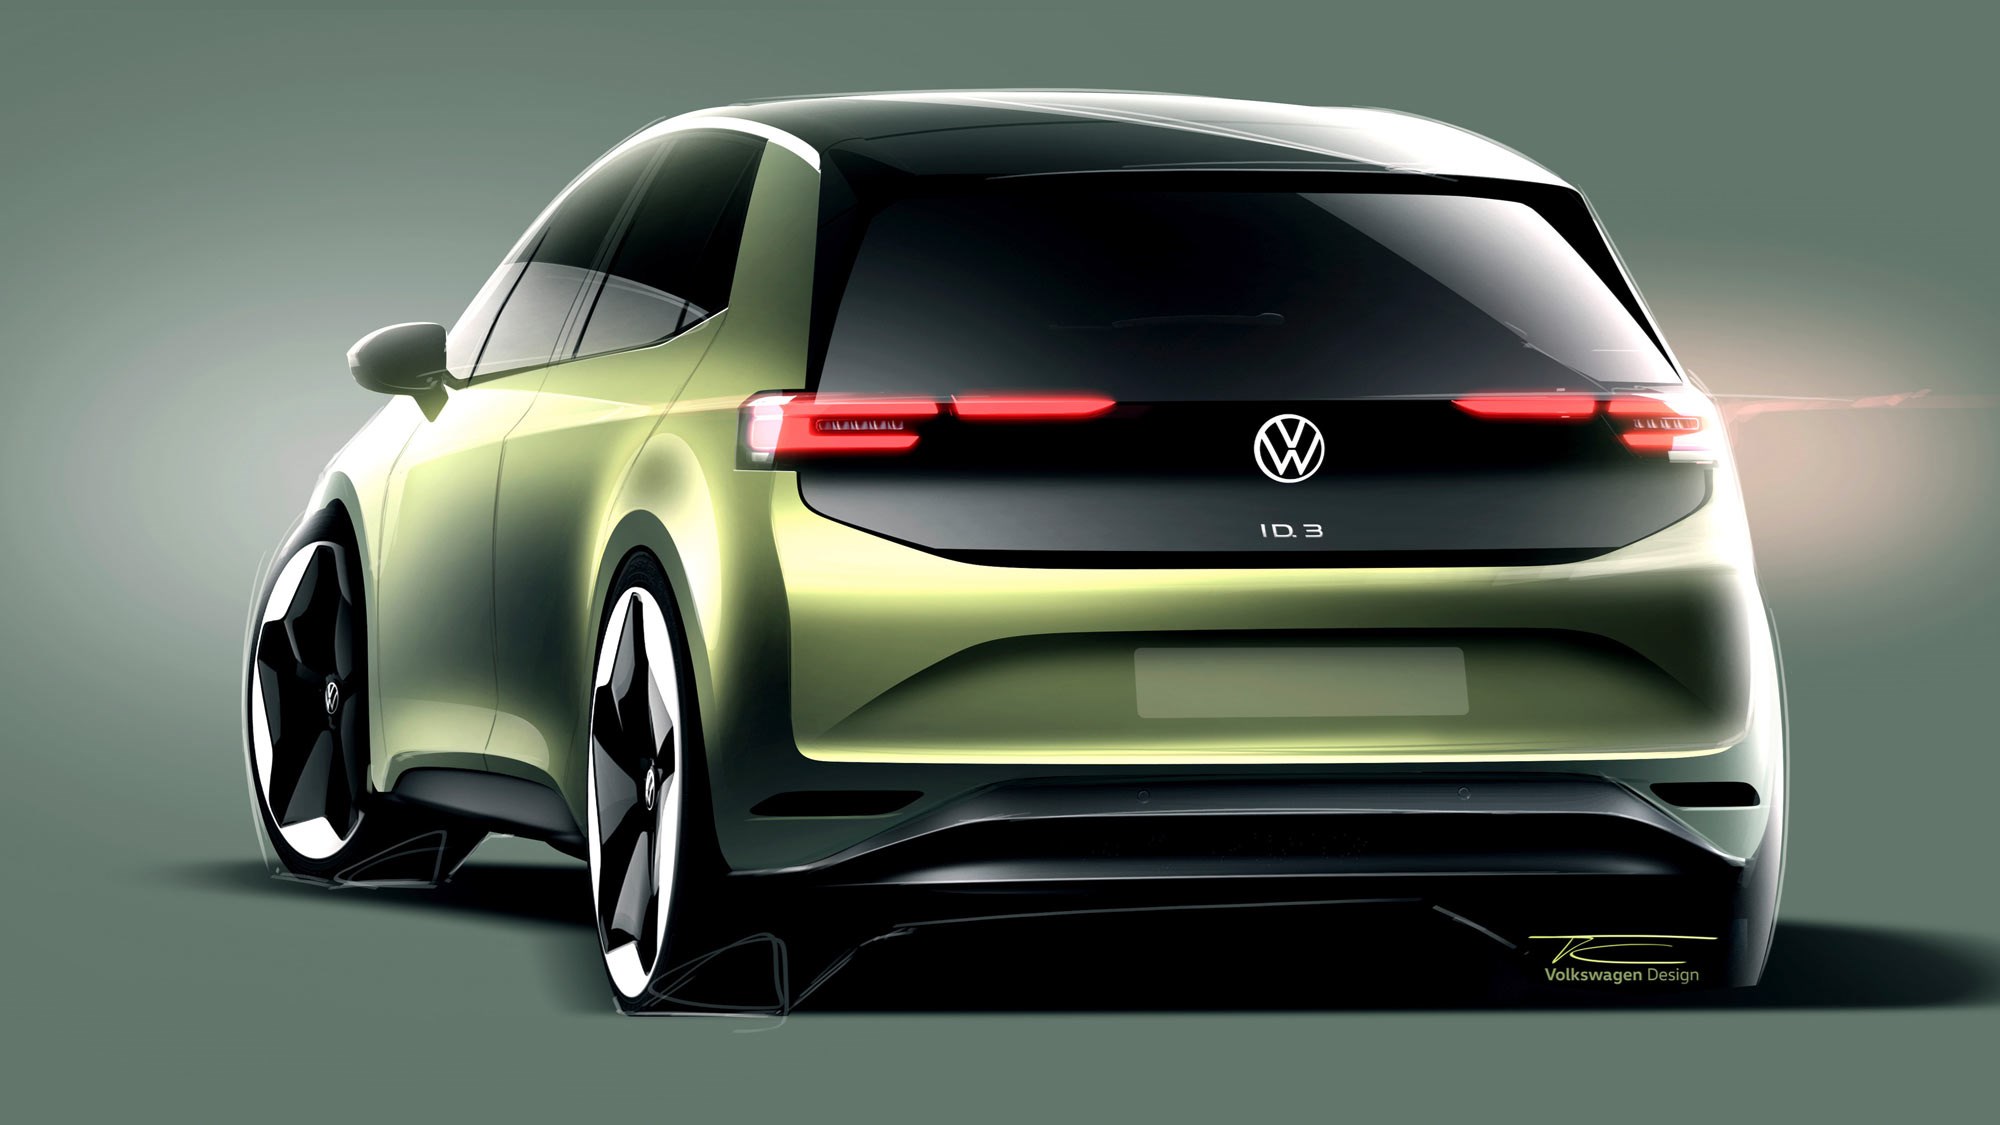 VW ID.3 facelift turns up the tech but doesn't bring back buttons